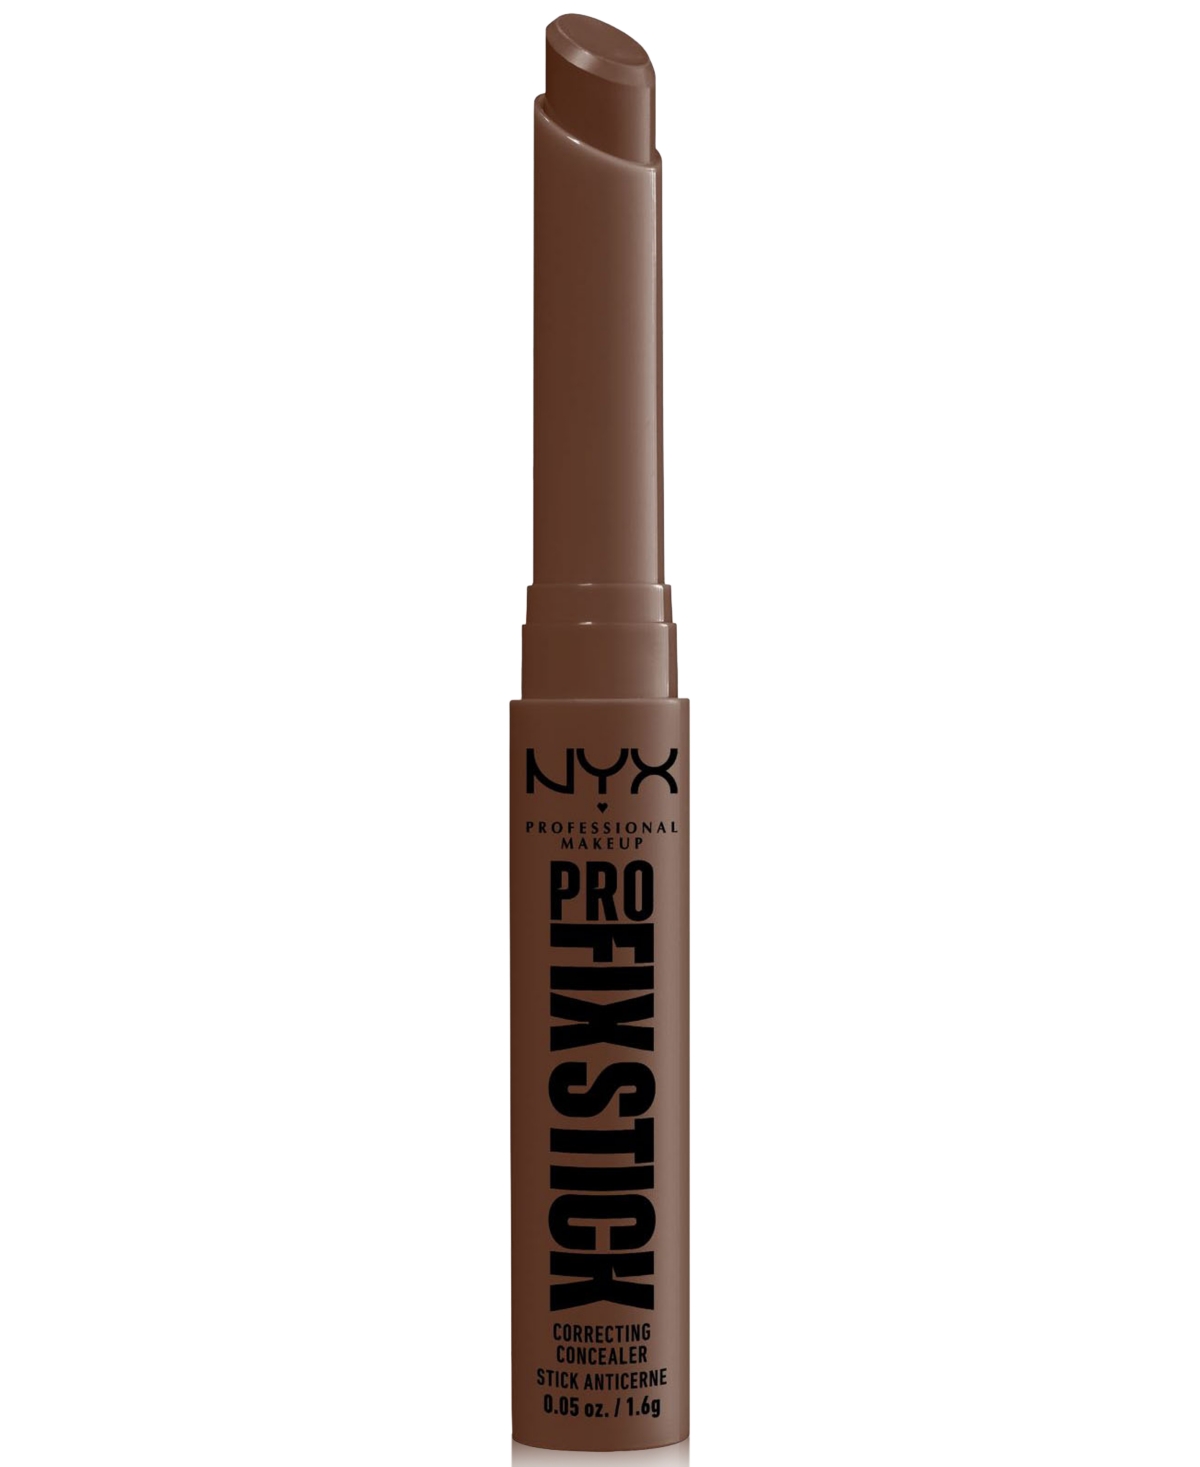 Nyx Professional Makeup Pro Fix Stick Correcting Concealer, 0.05 Oz. In Walnut